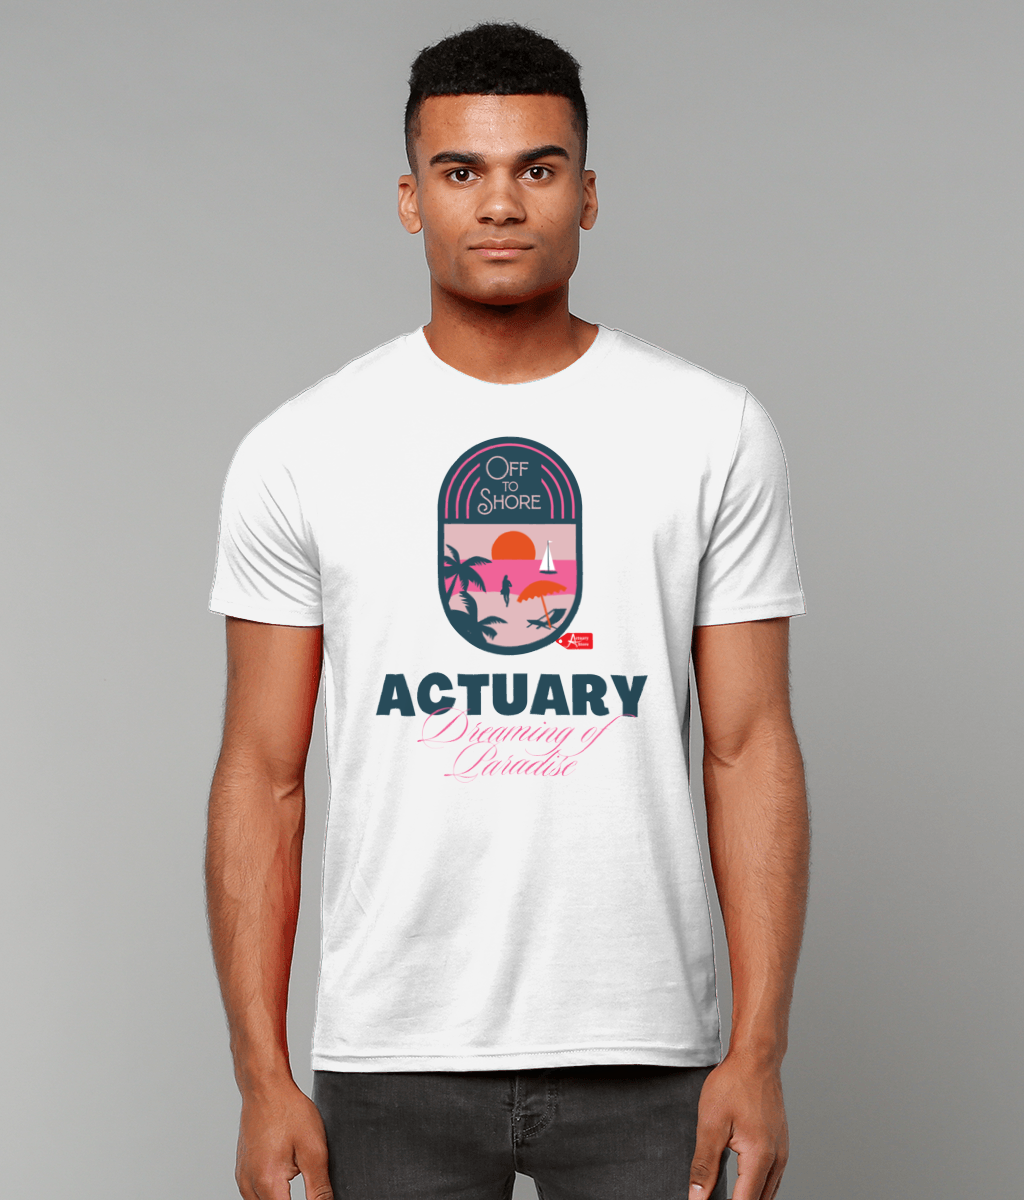 Actuary Dreaming of Paradise Off To Shore T-Shirt